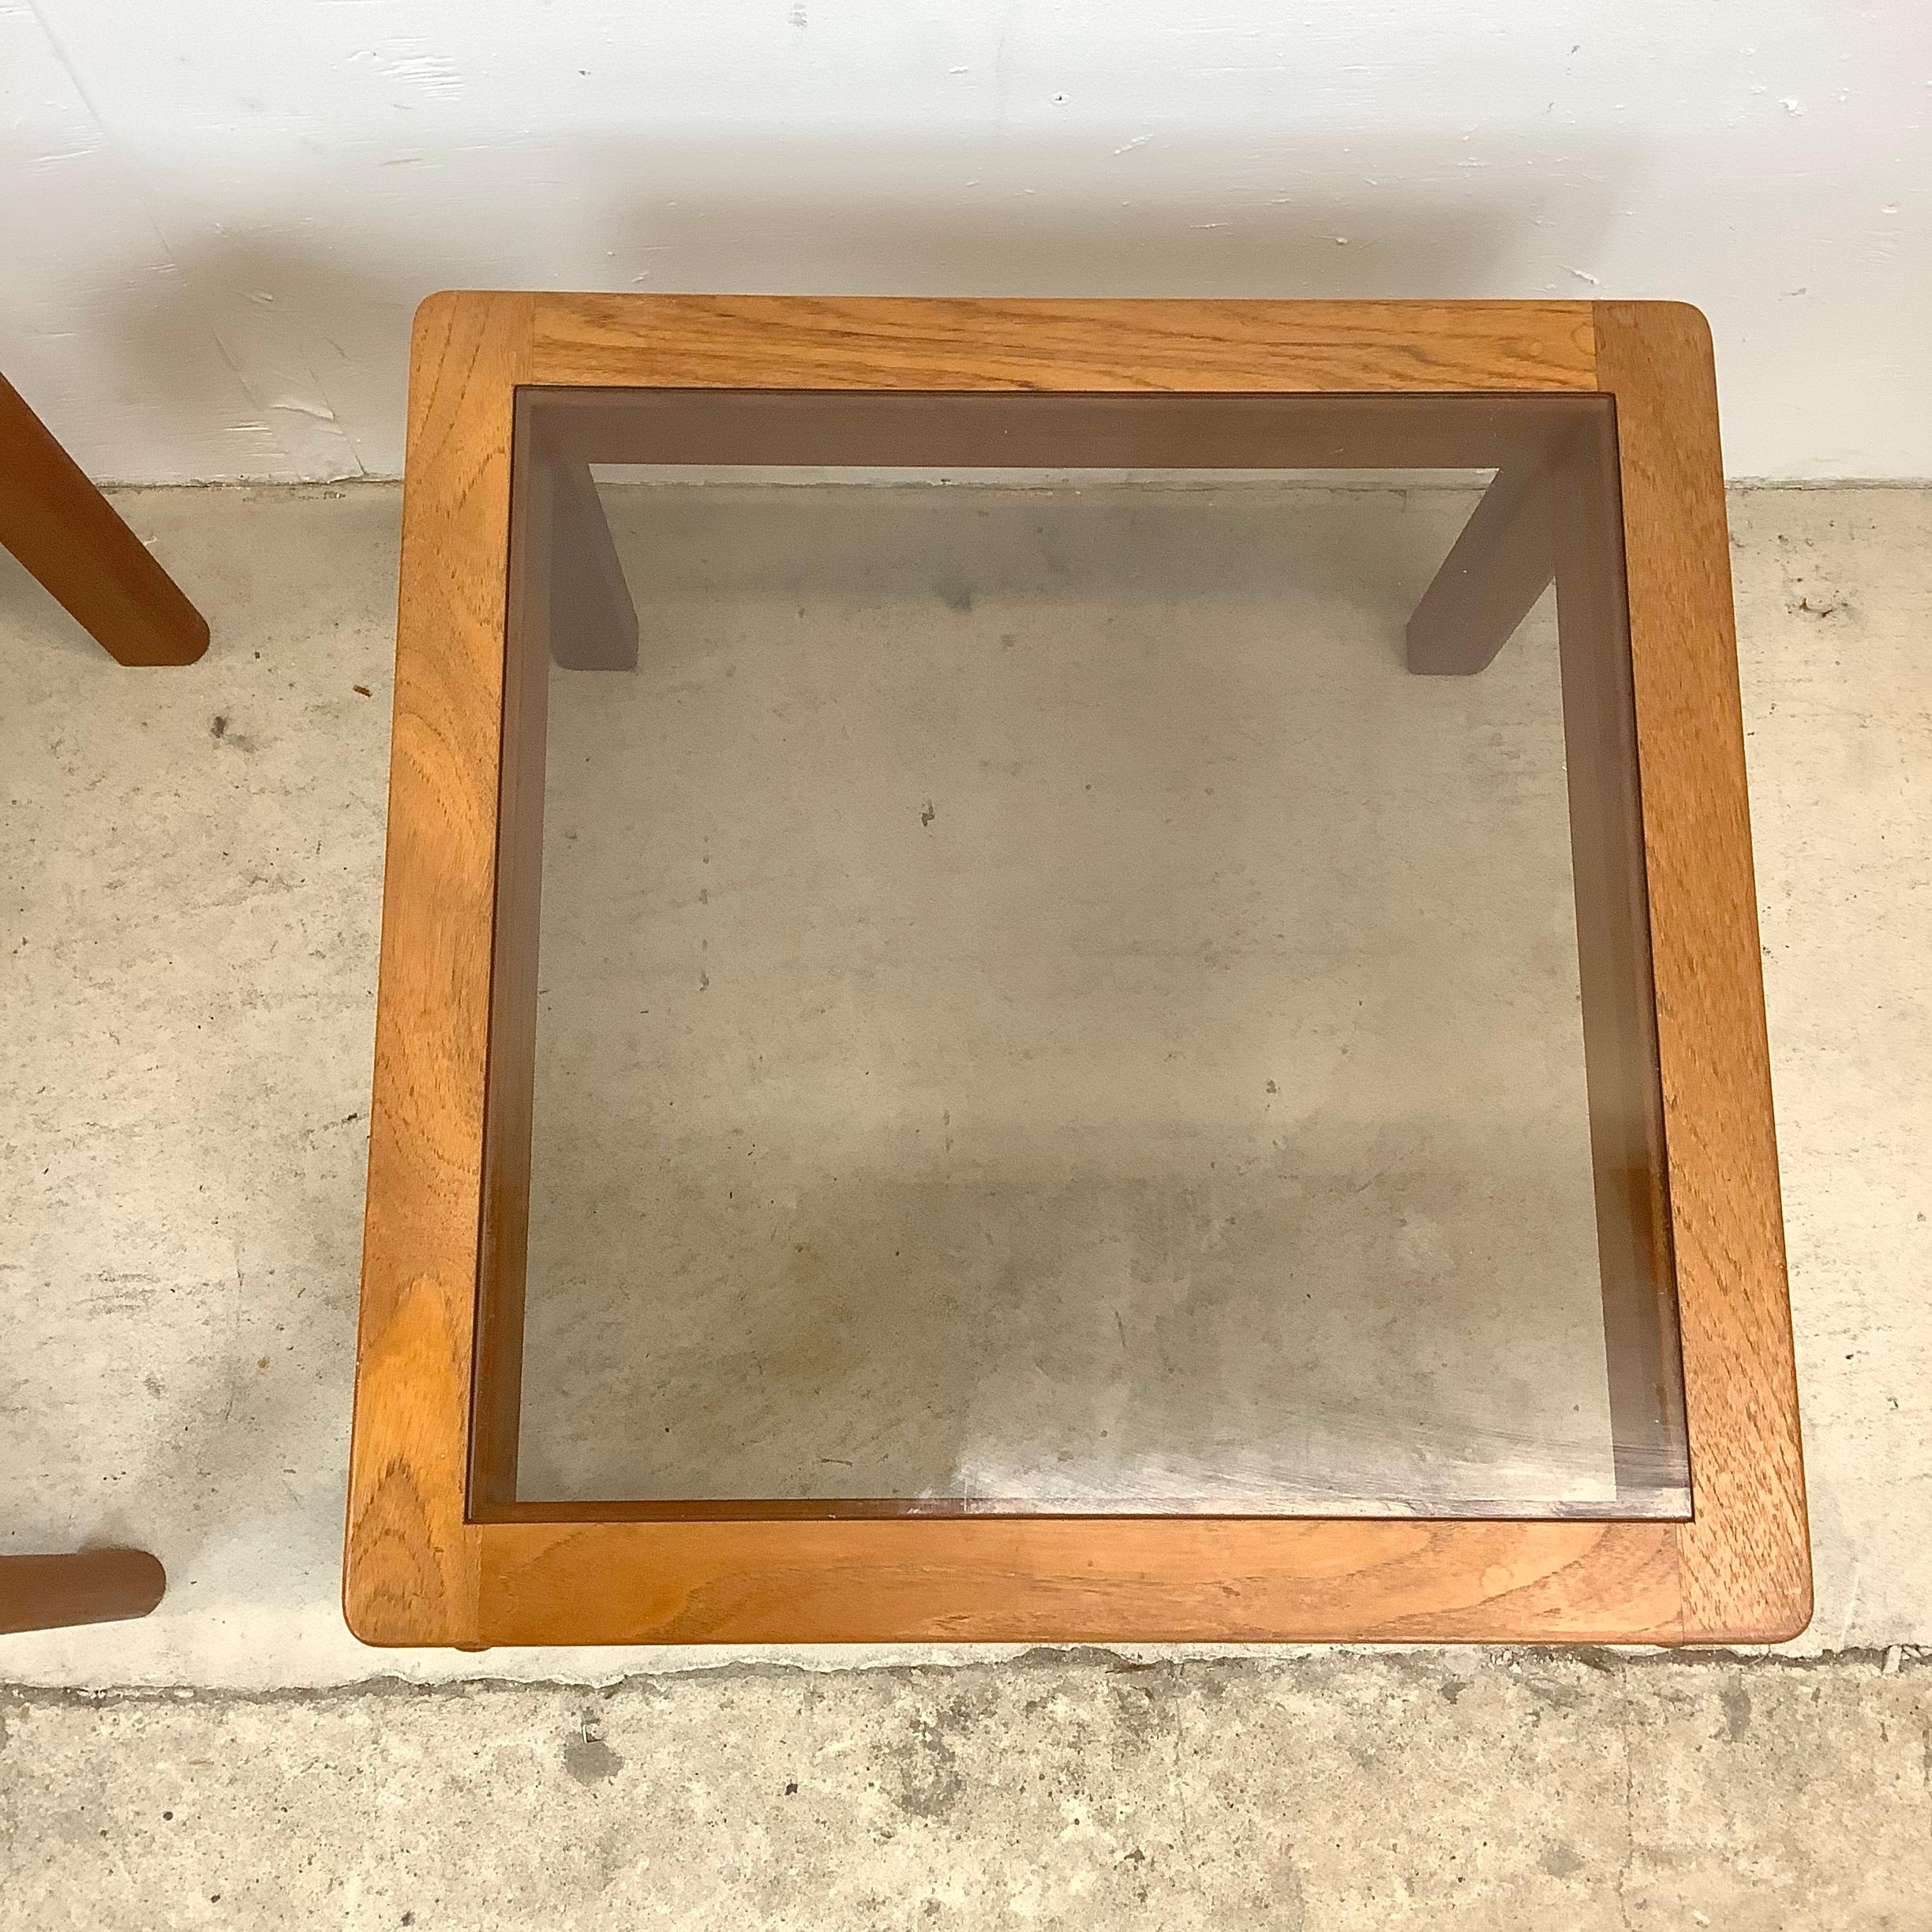 Pair Scandinavian Modern End Tables With Teak Joinery In Good Condition For Sale In Trenton, NJ